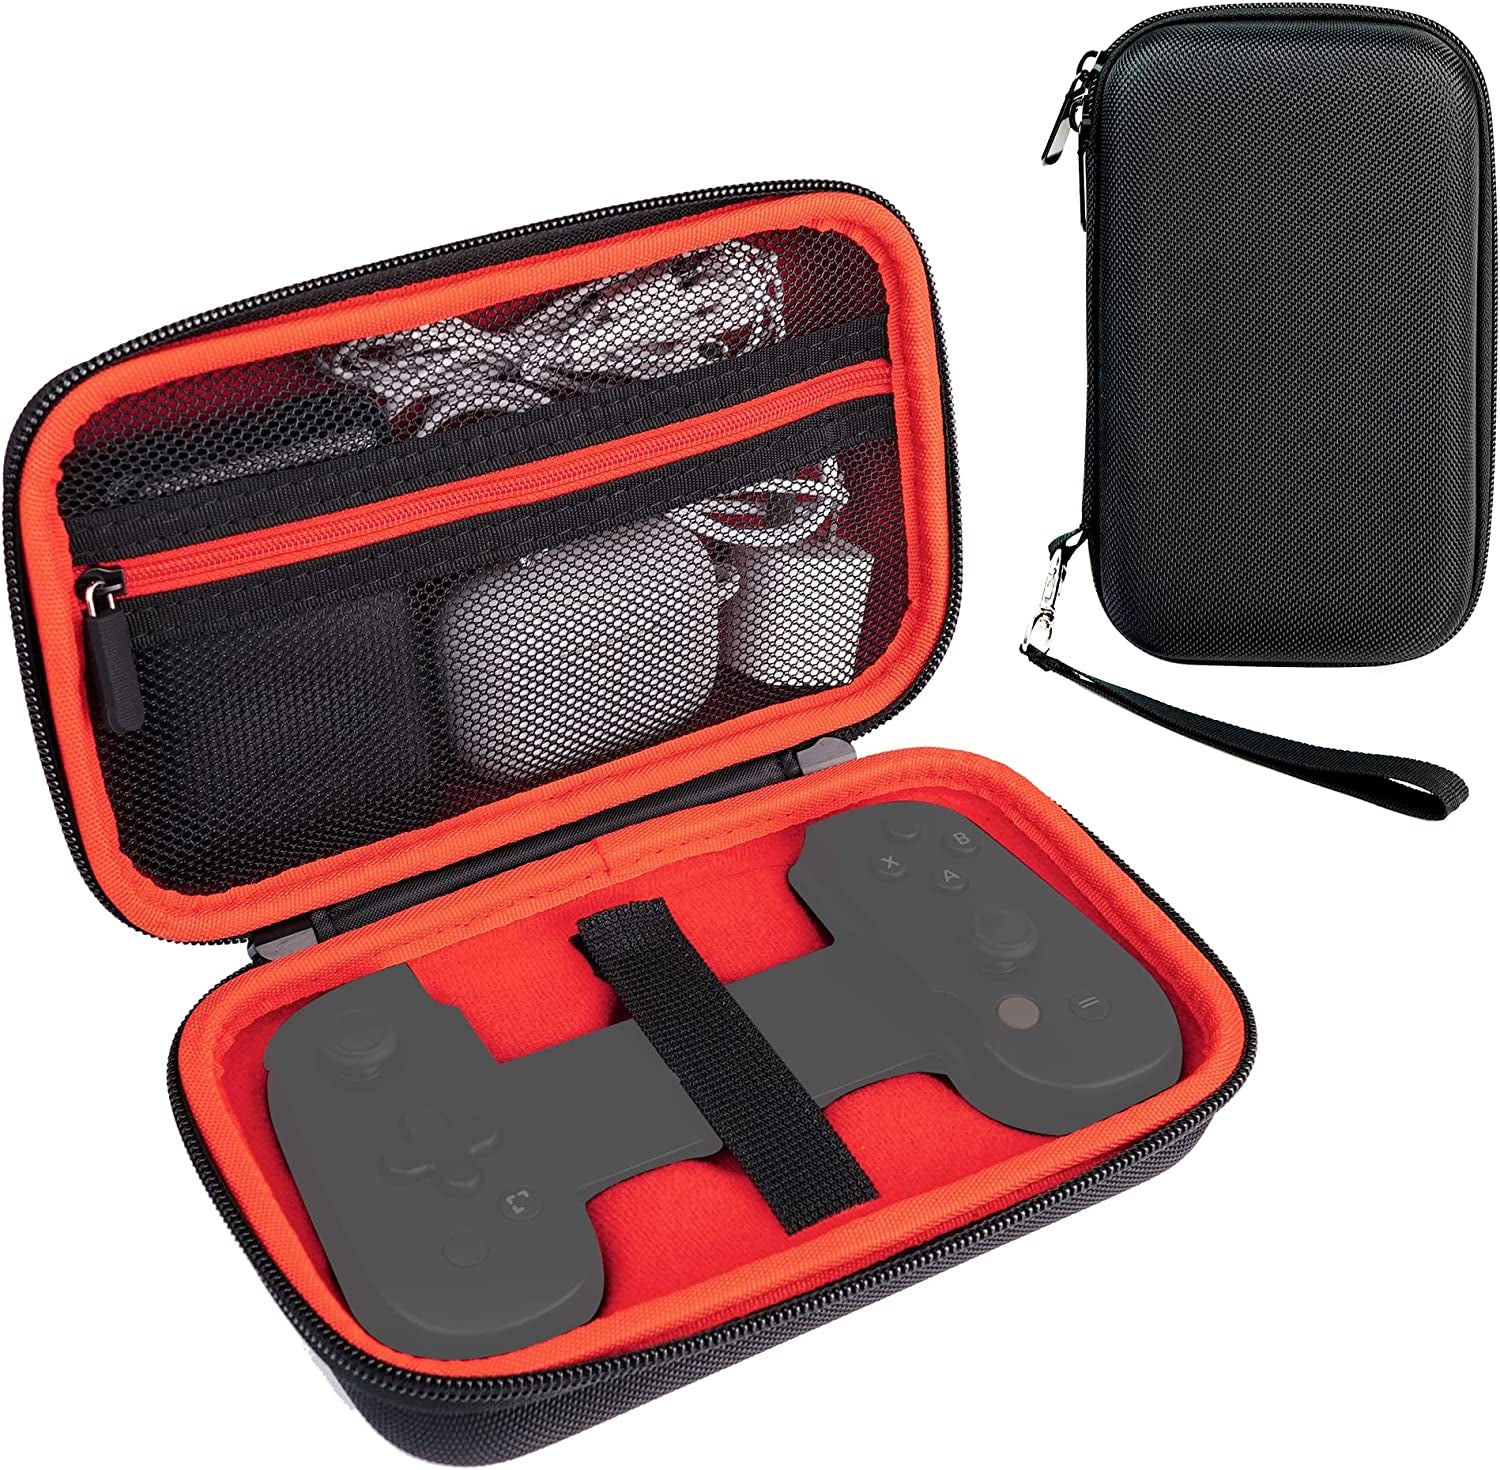 Carrying Case Compatible with Backbone One, Nylon Hard Shell, Large Protective Carrying Case, with a Wristband, Keychain and Net Pocket for Accessories (Black/Red)